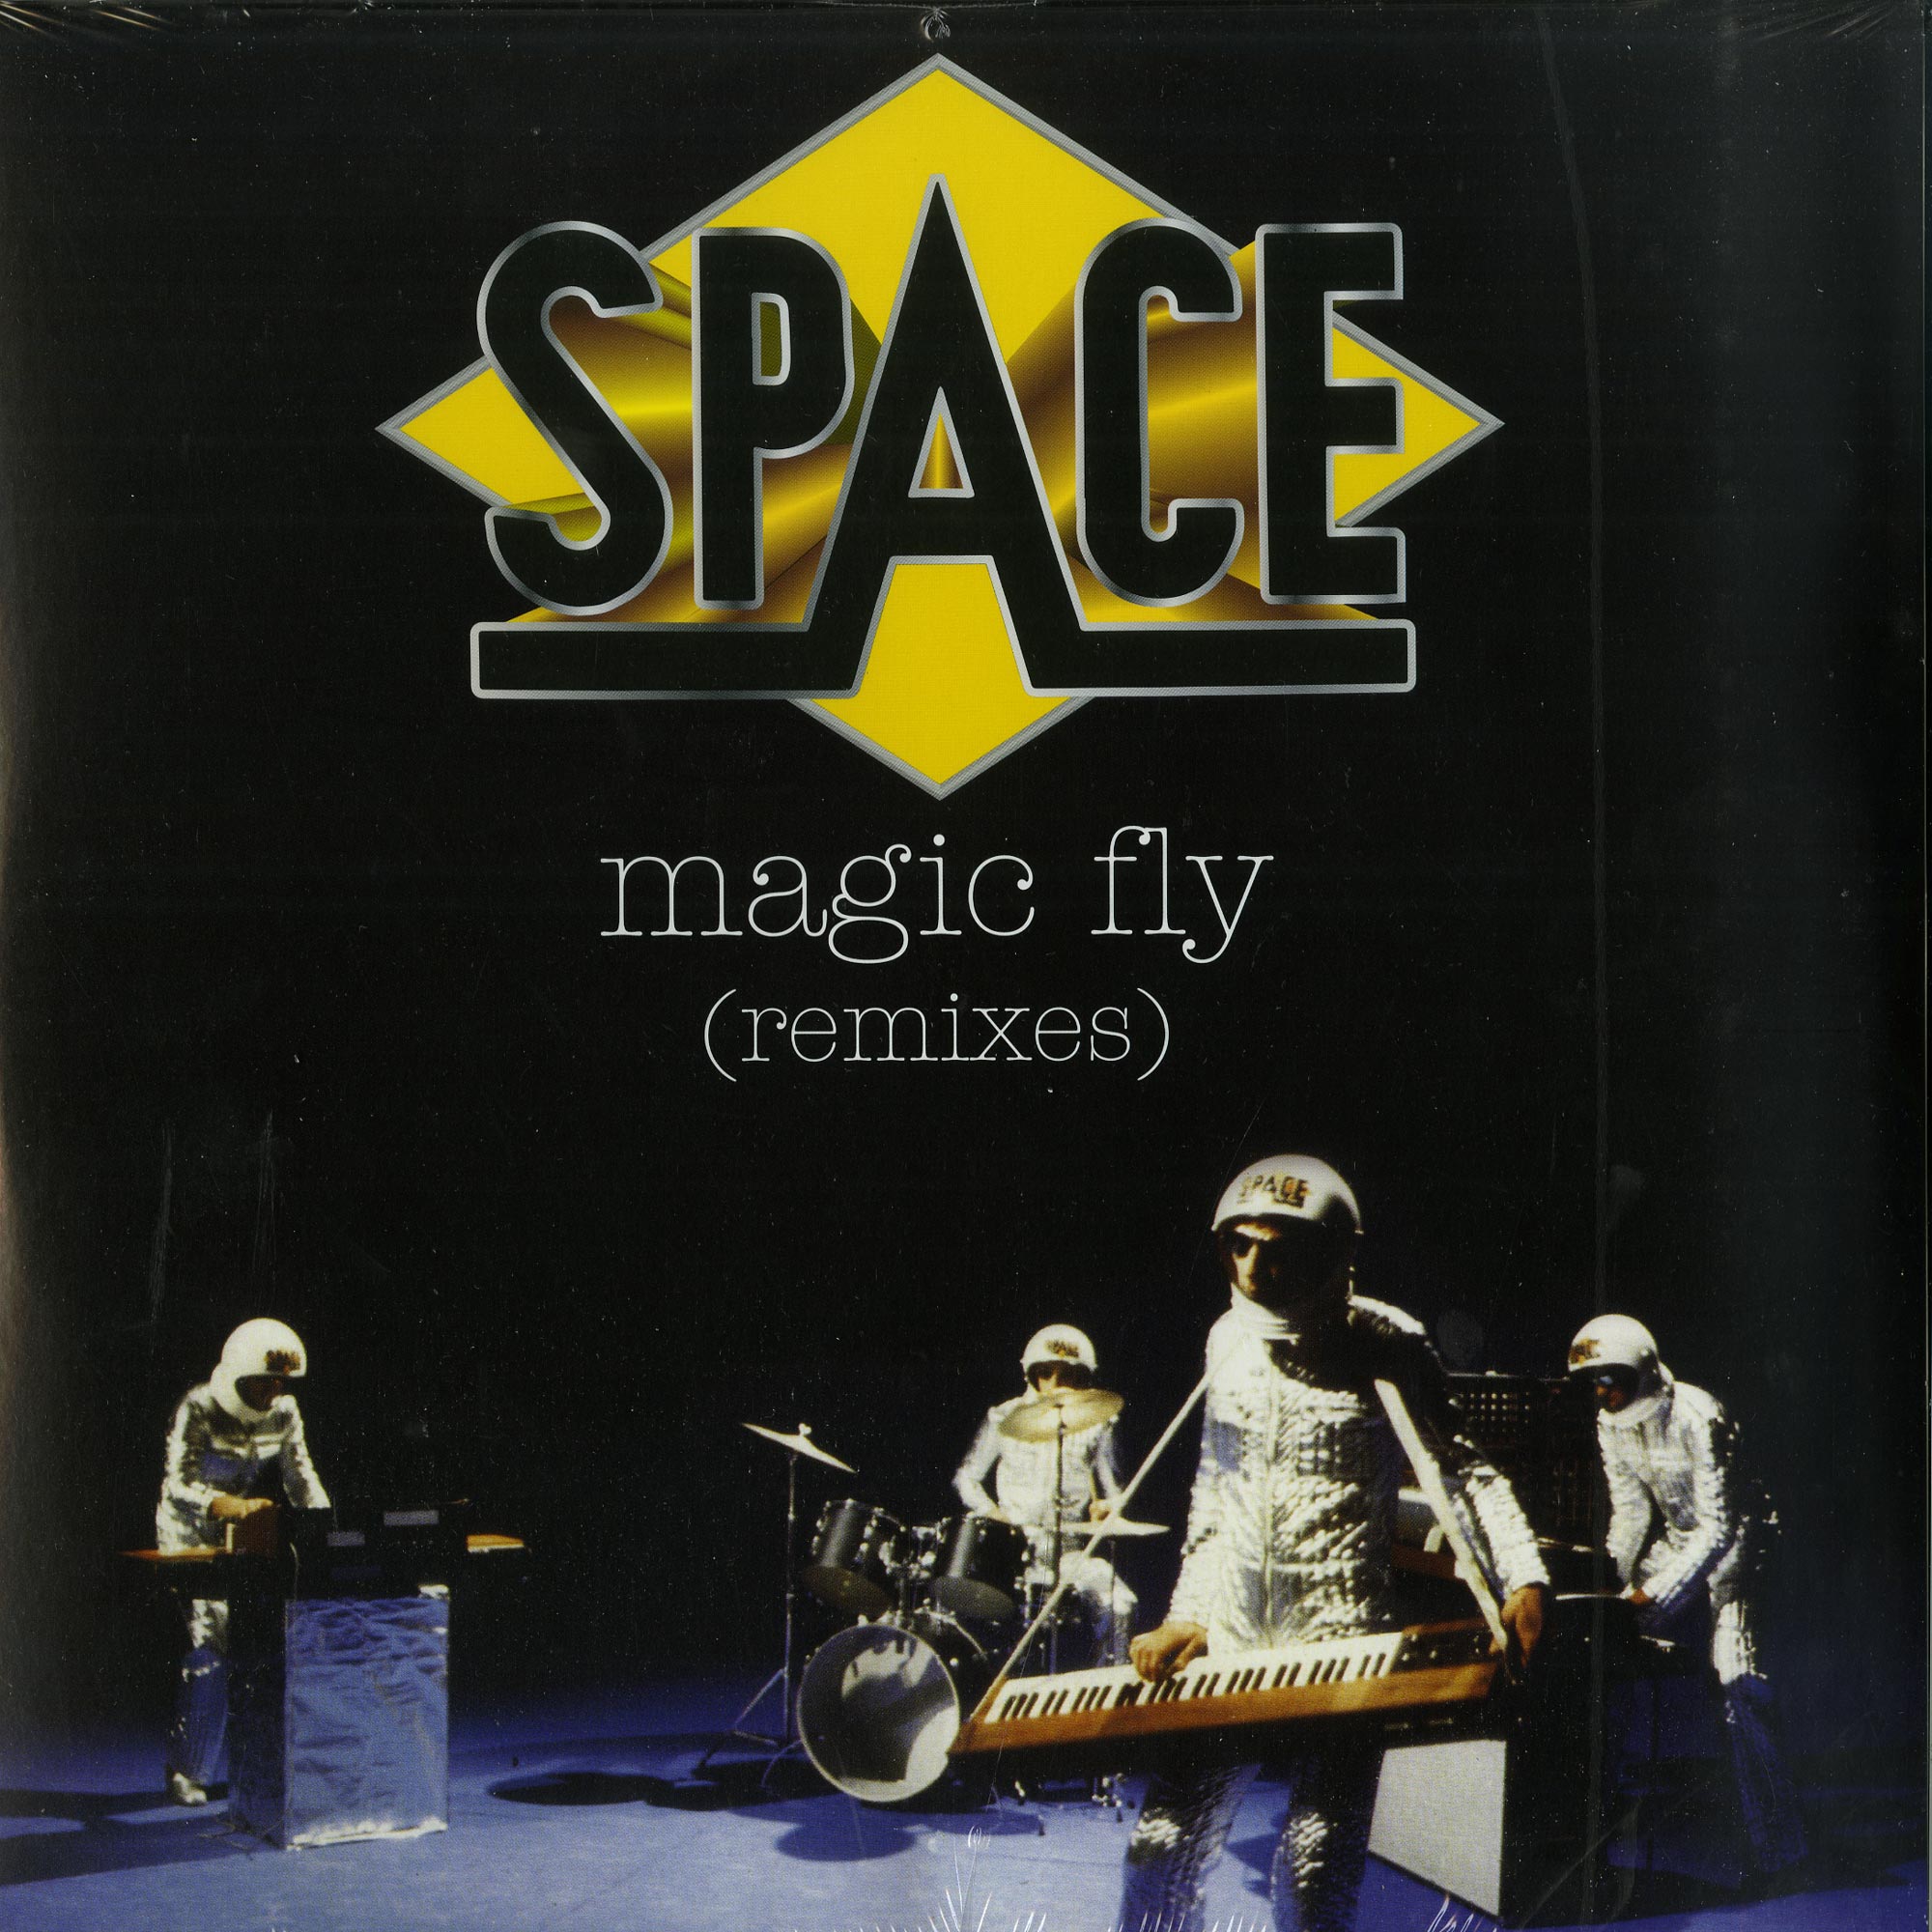 Fly to space. Space 1977 Magic Fly CD. Спейс группа 1977. Space "Magic Fly". Space обложки альбомов.